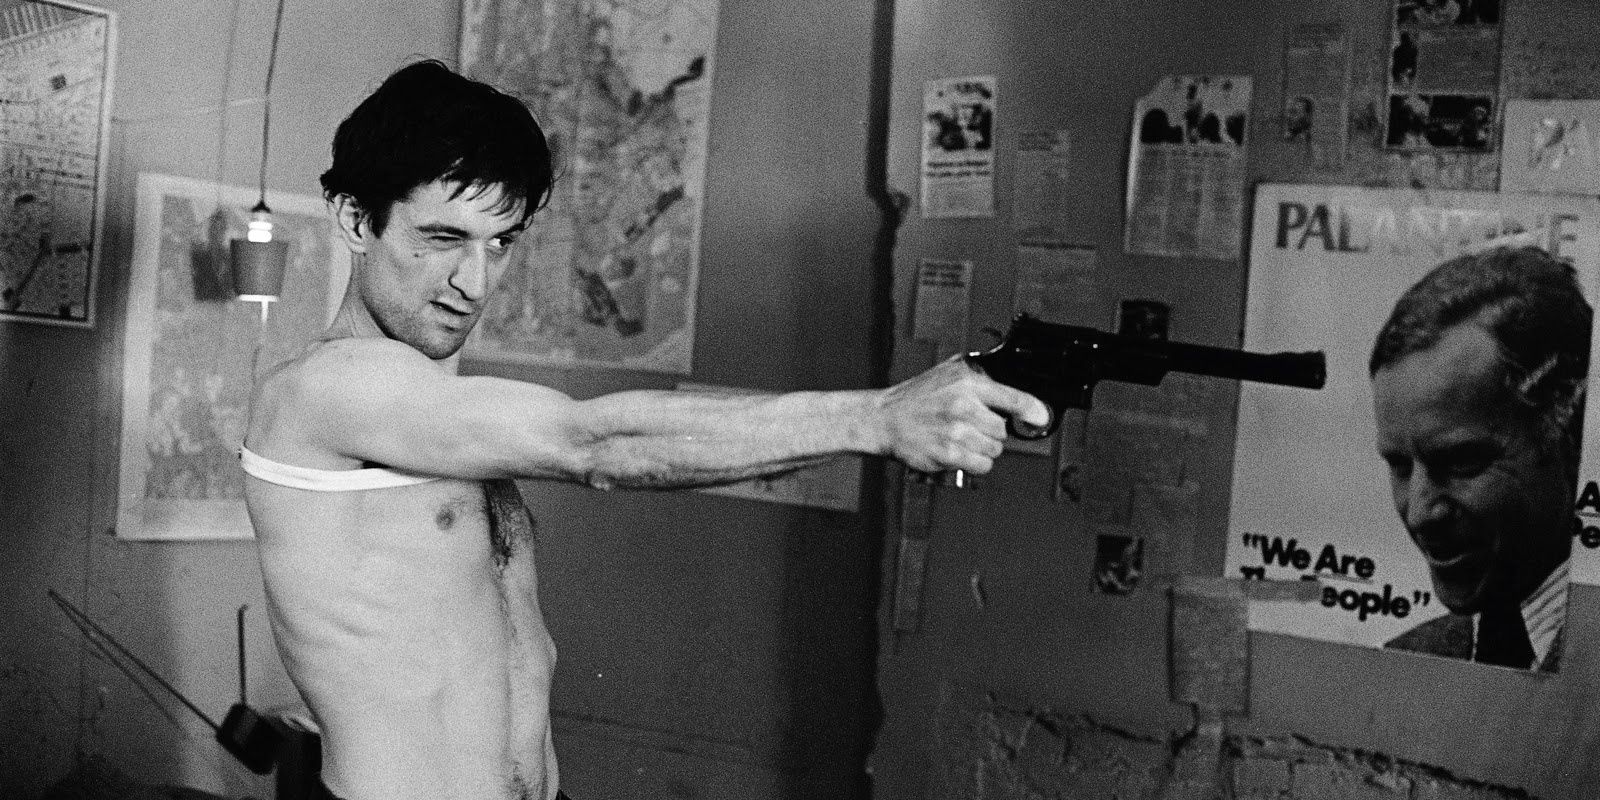 Taxi Driver 10 Most Iconic Moments Ranked